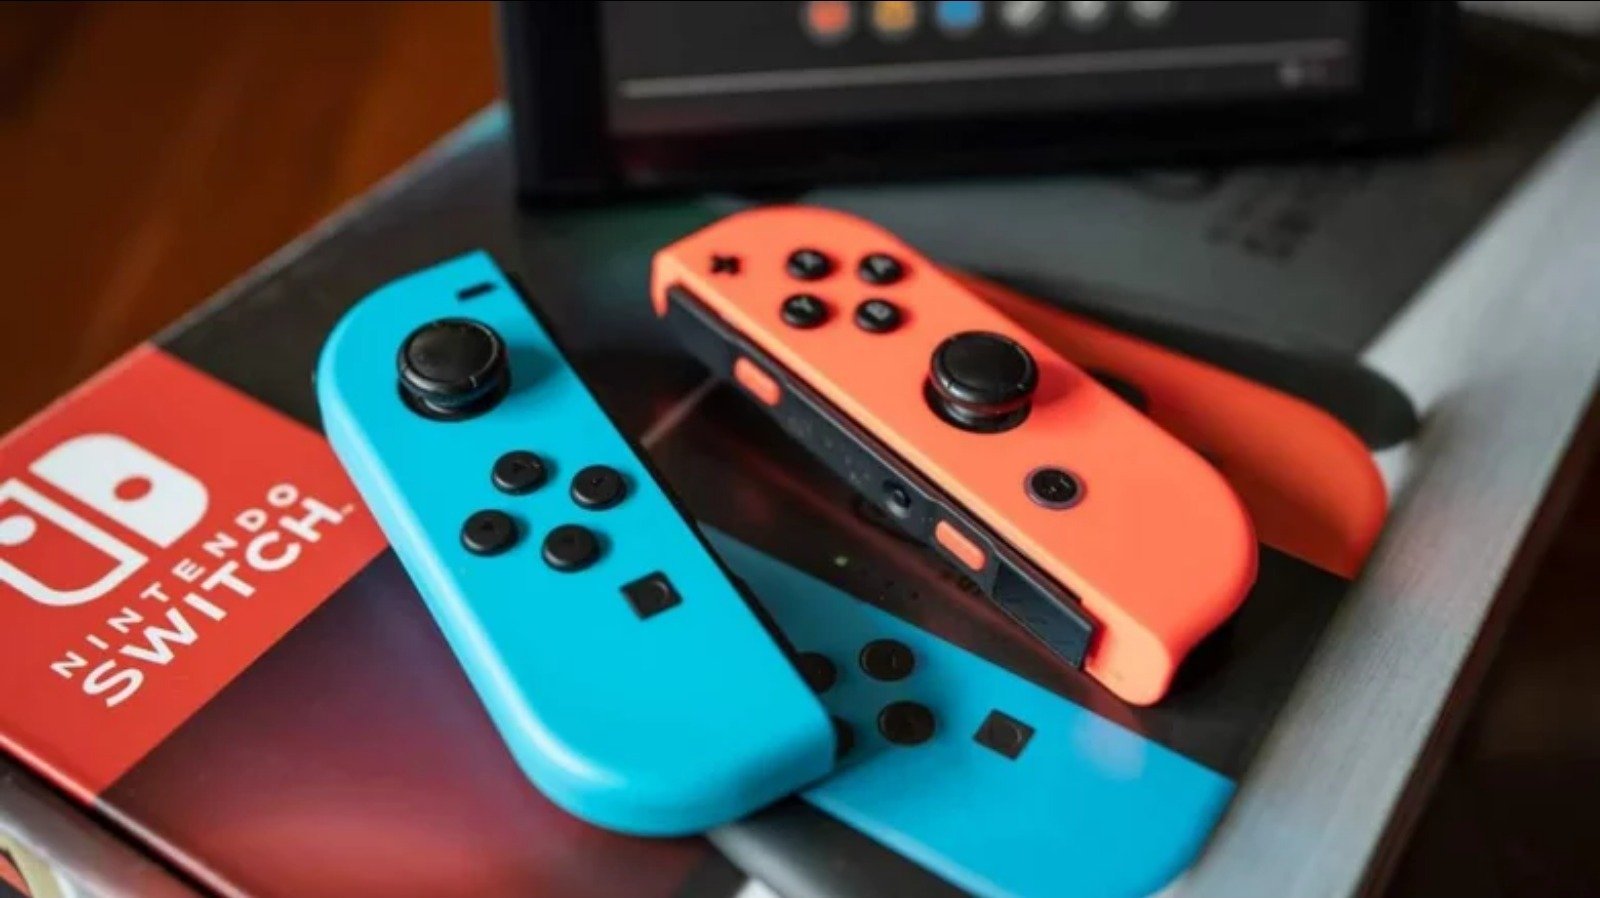 10 Features We Want To See In Nintendo Switch 2